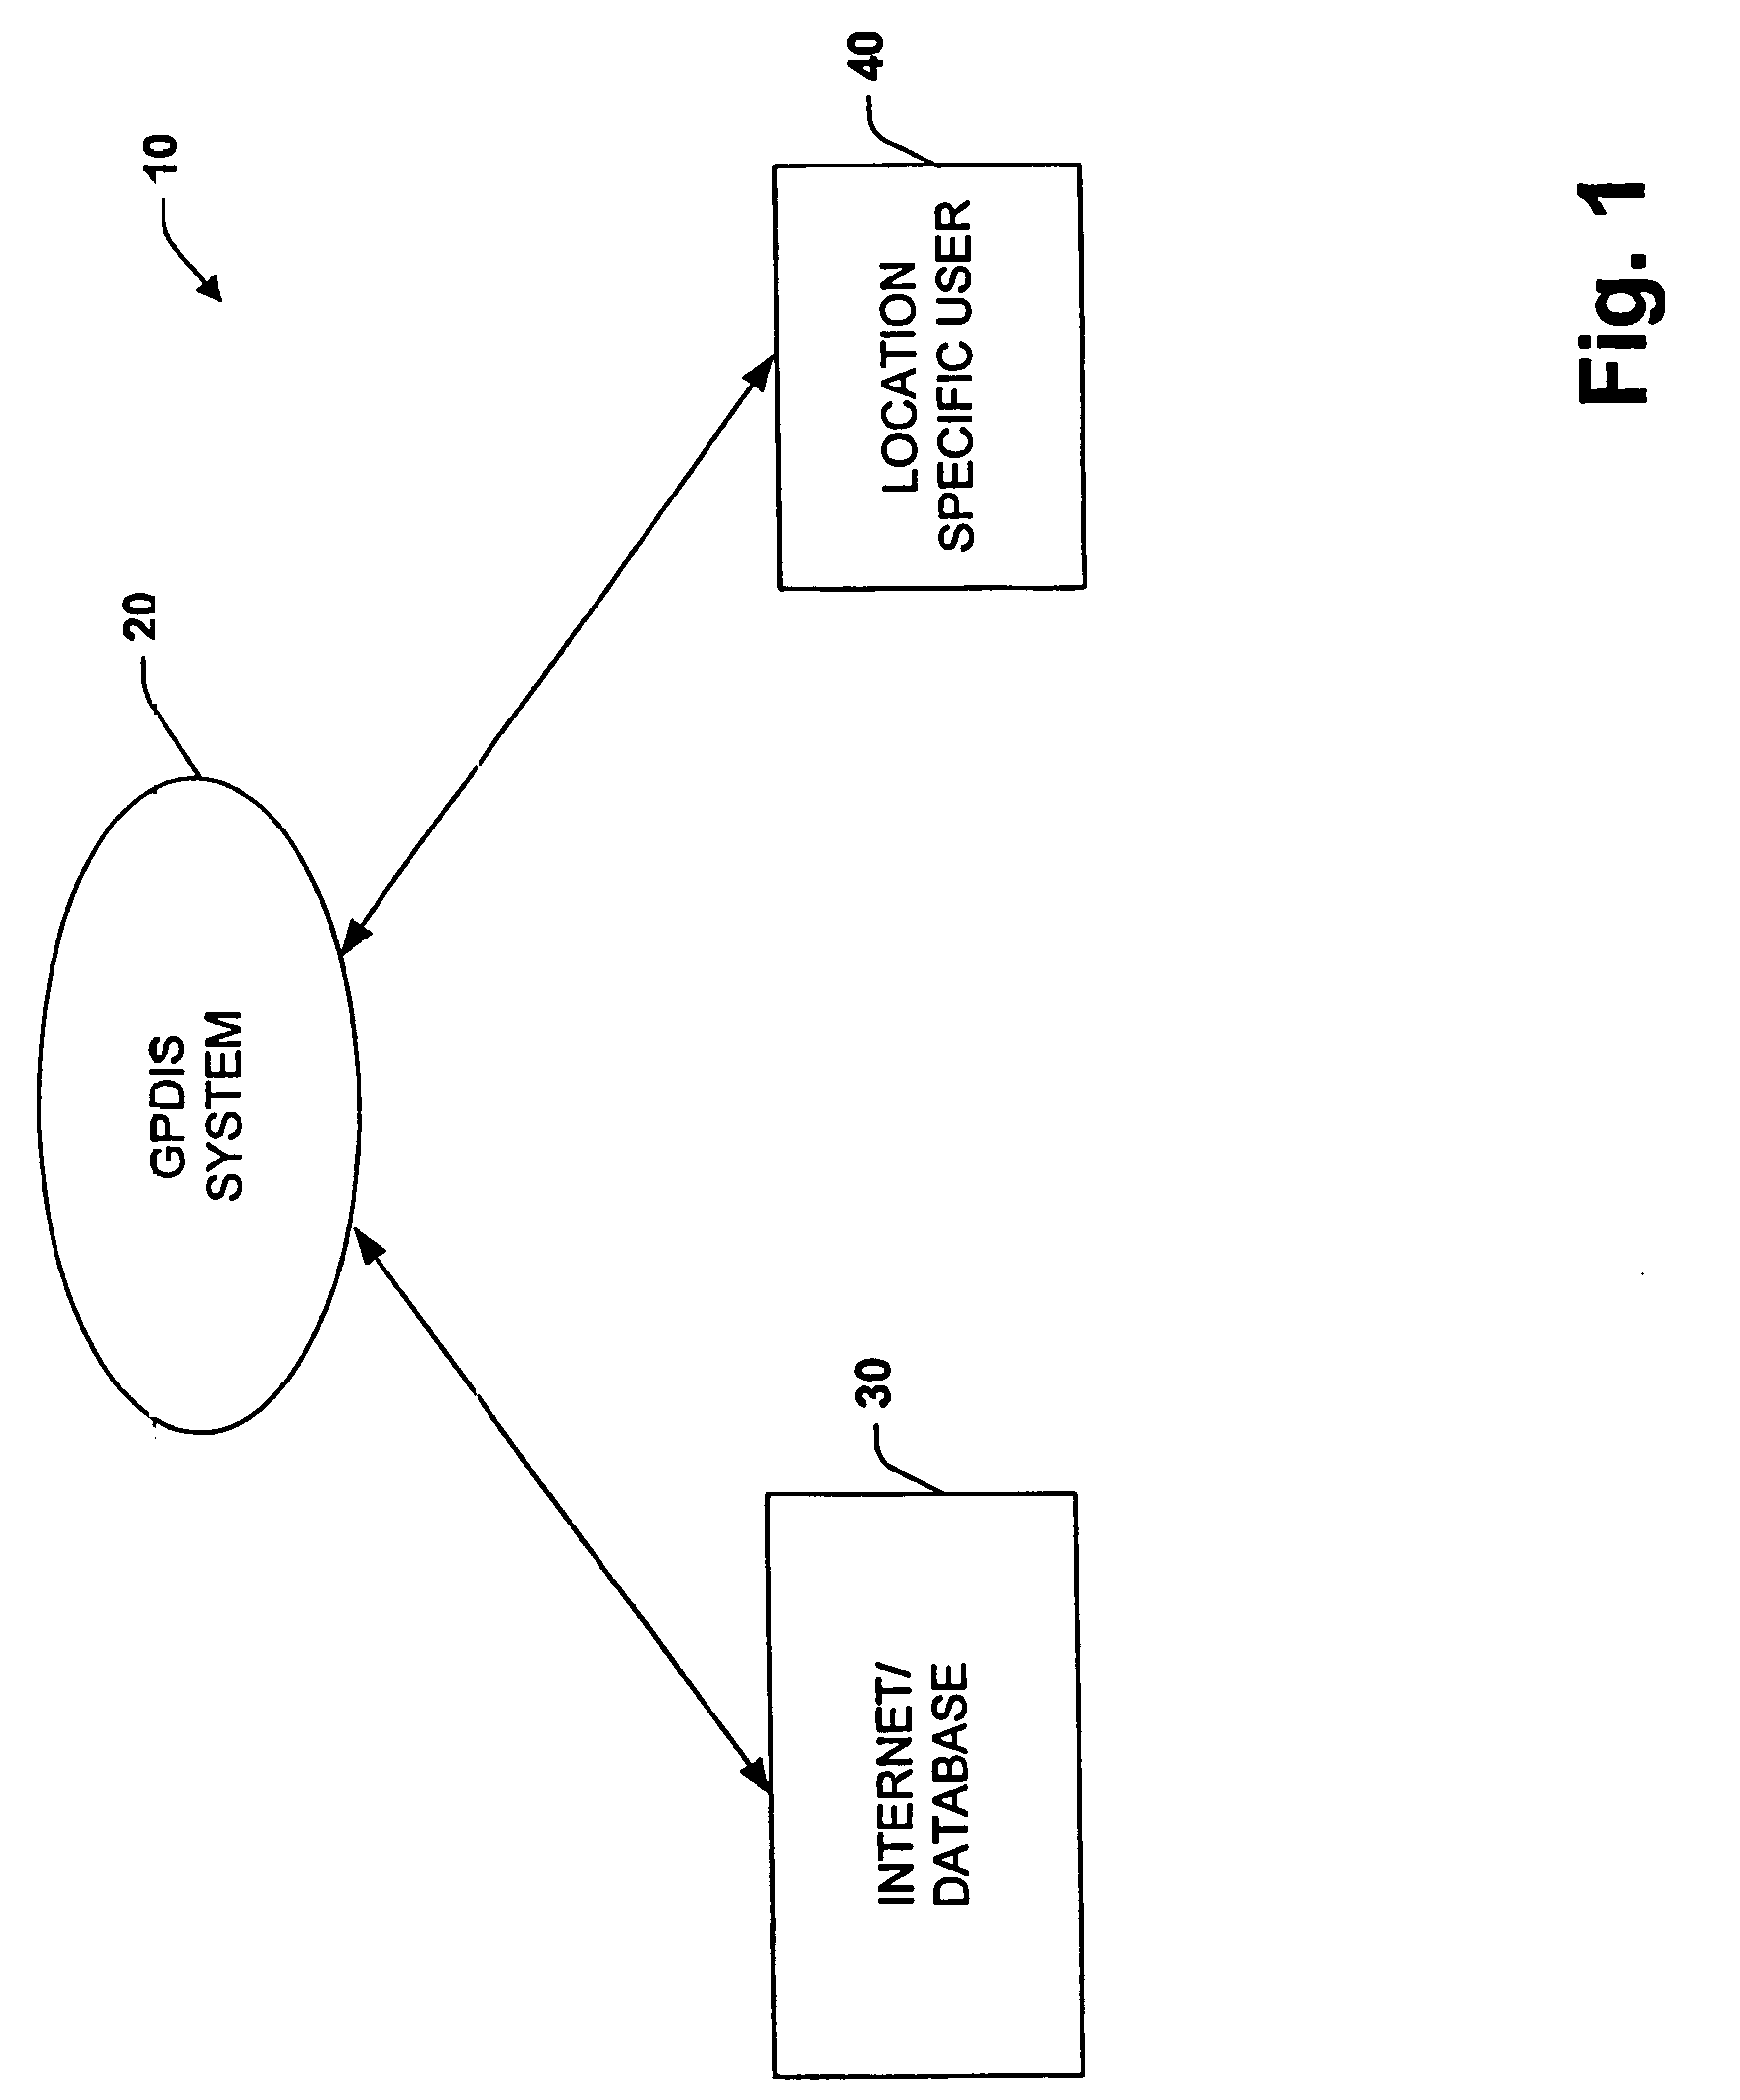 System for dynamically pushing information to a user utilizing global positioning system